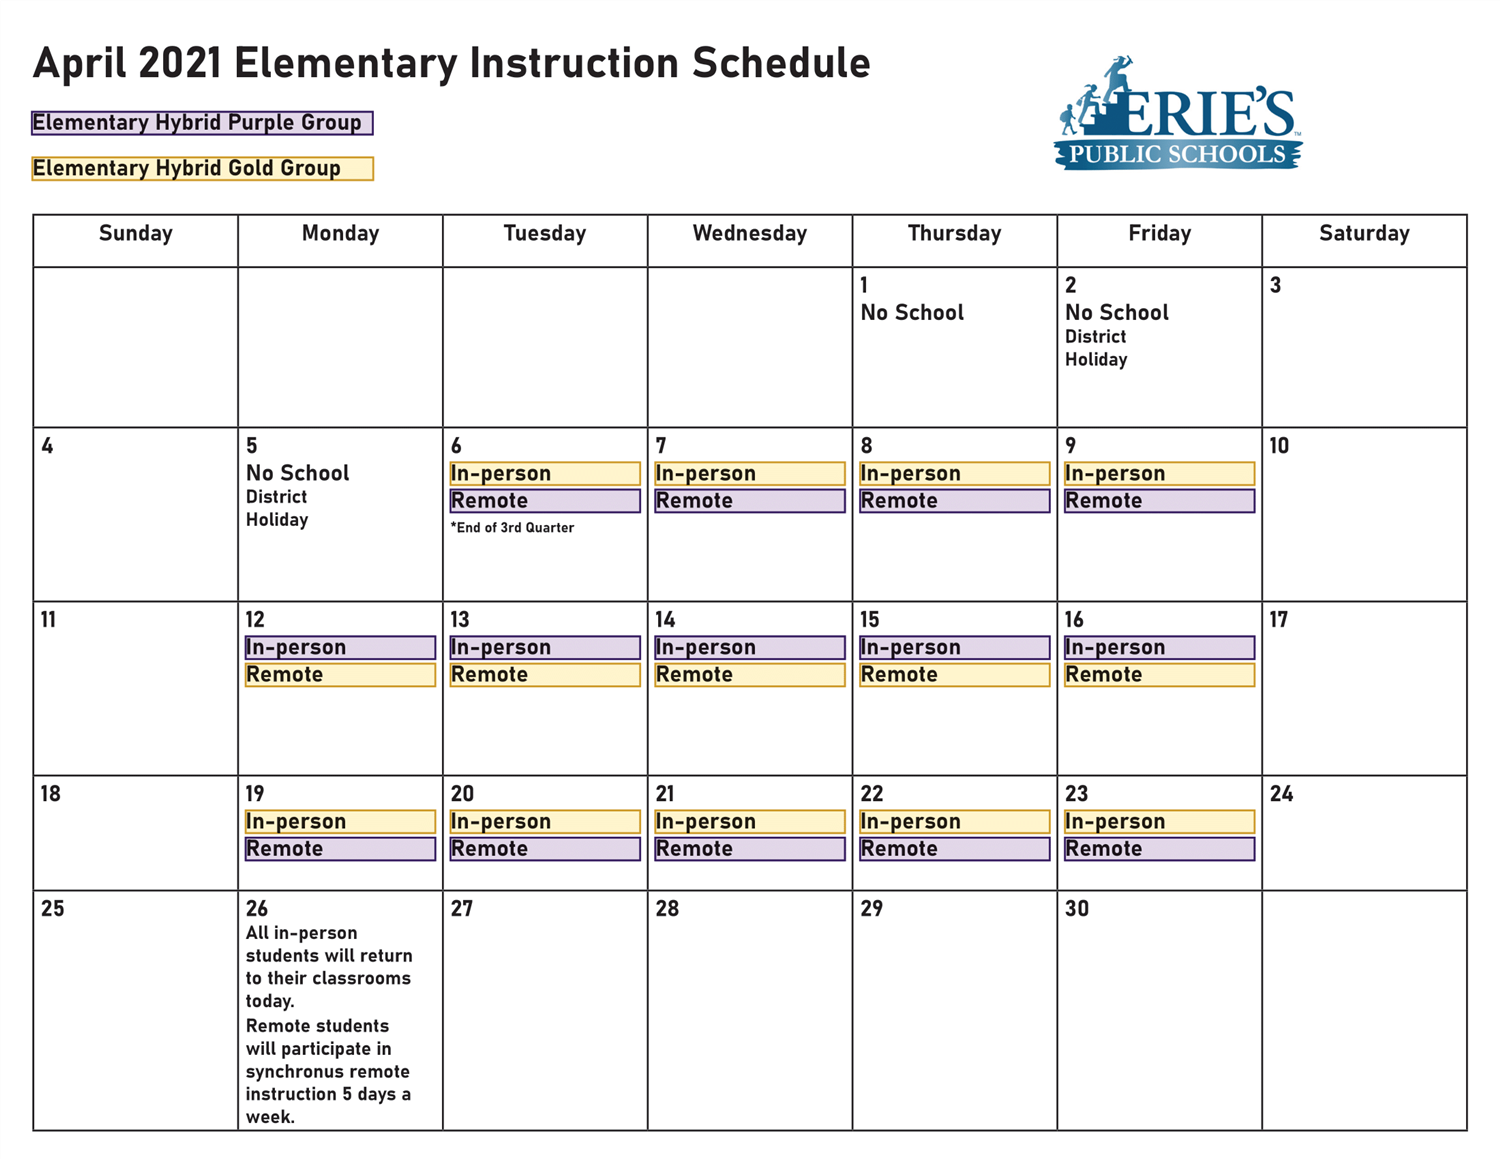 Return to In-Person Instruction Elementary Schedule 